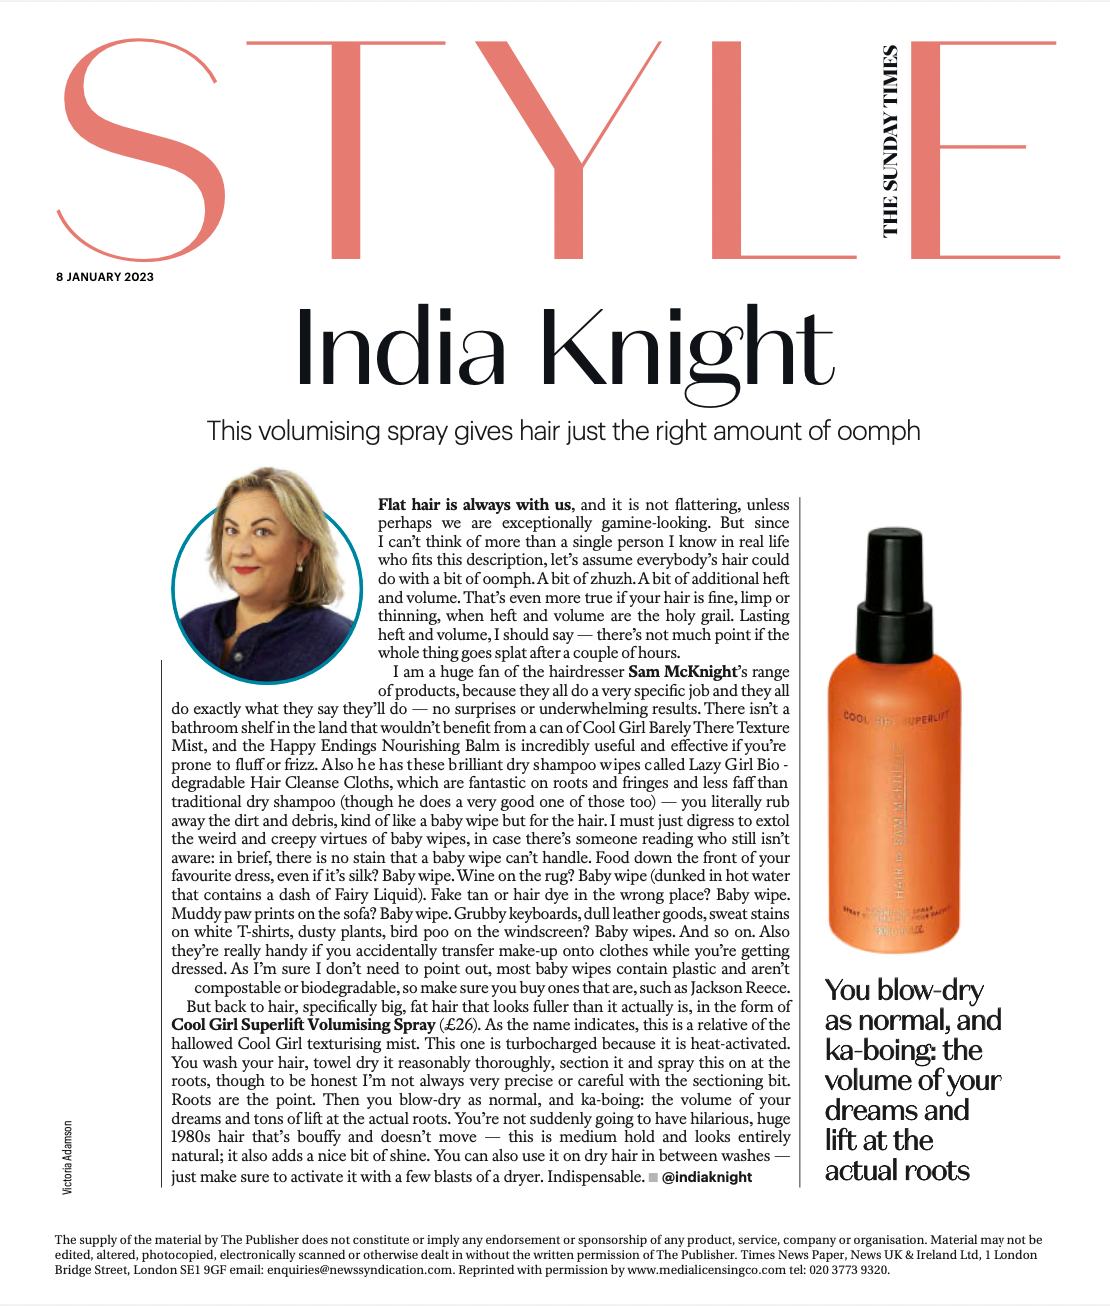 The volumising spray gives hair just the right amount of oomph, according to India Knight